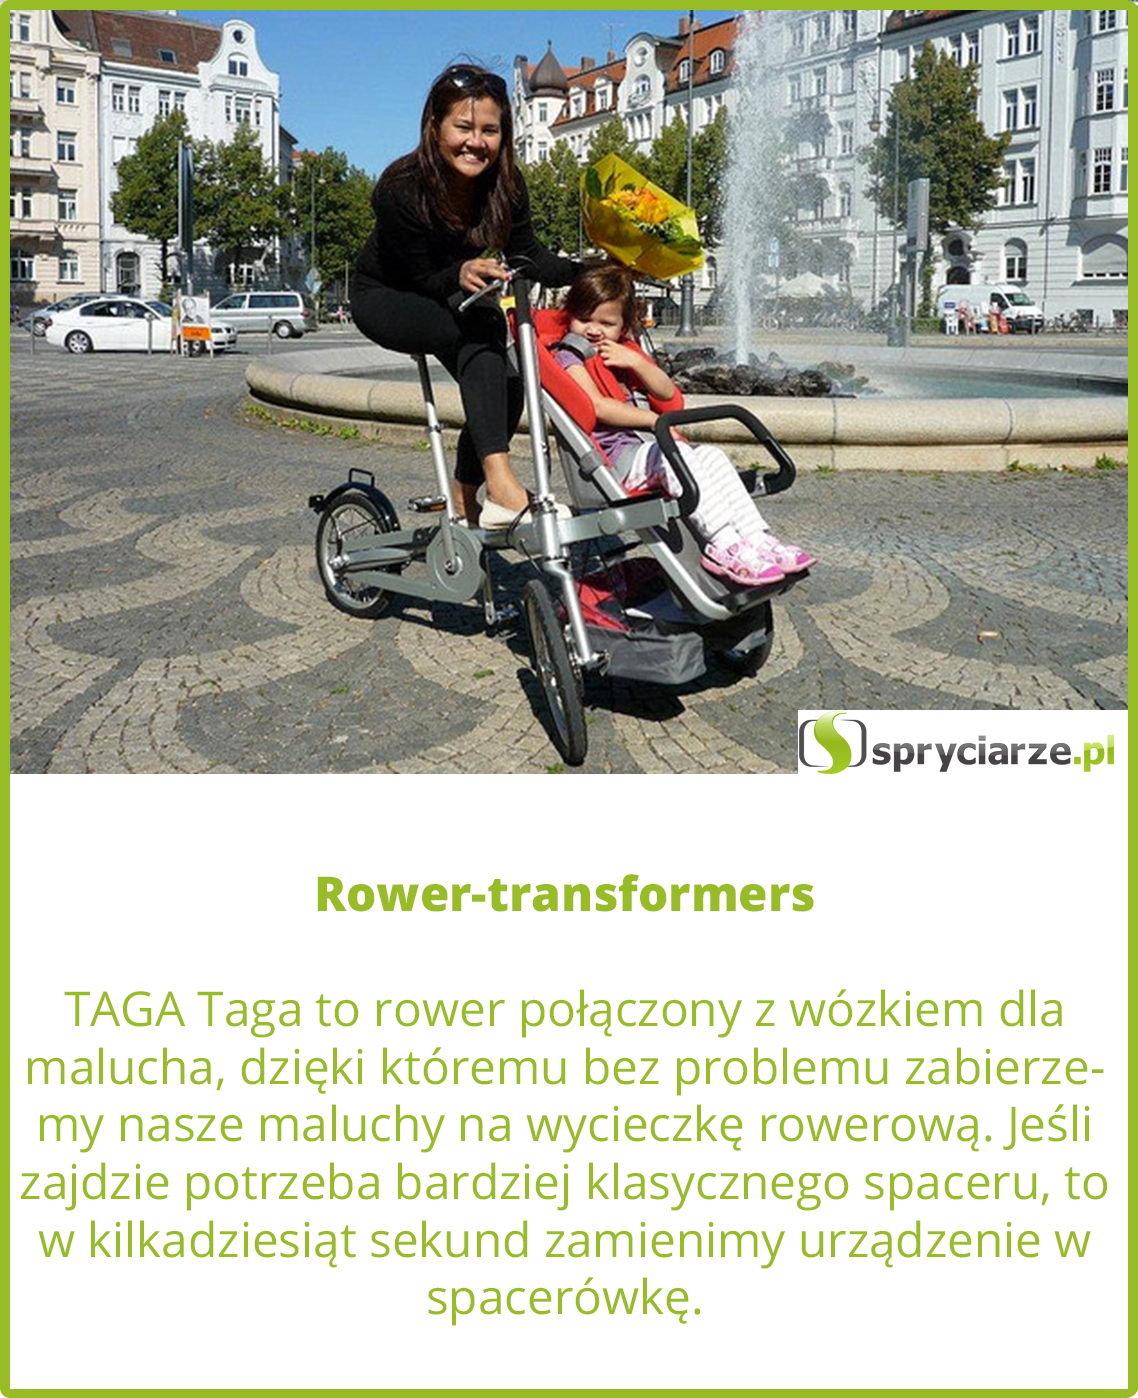 Rower-transformers